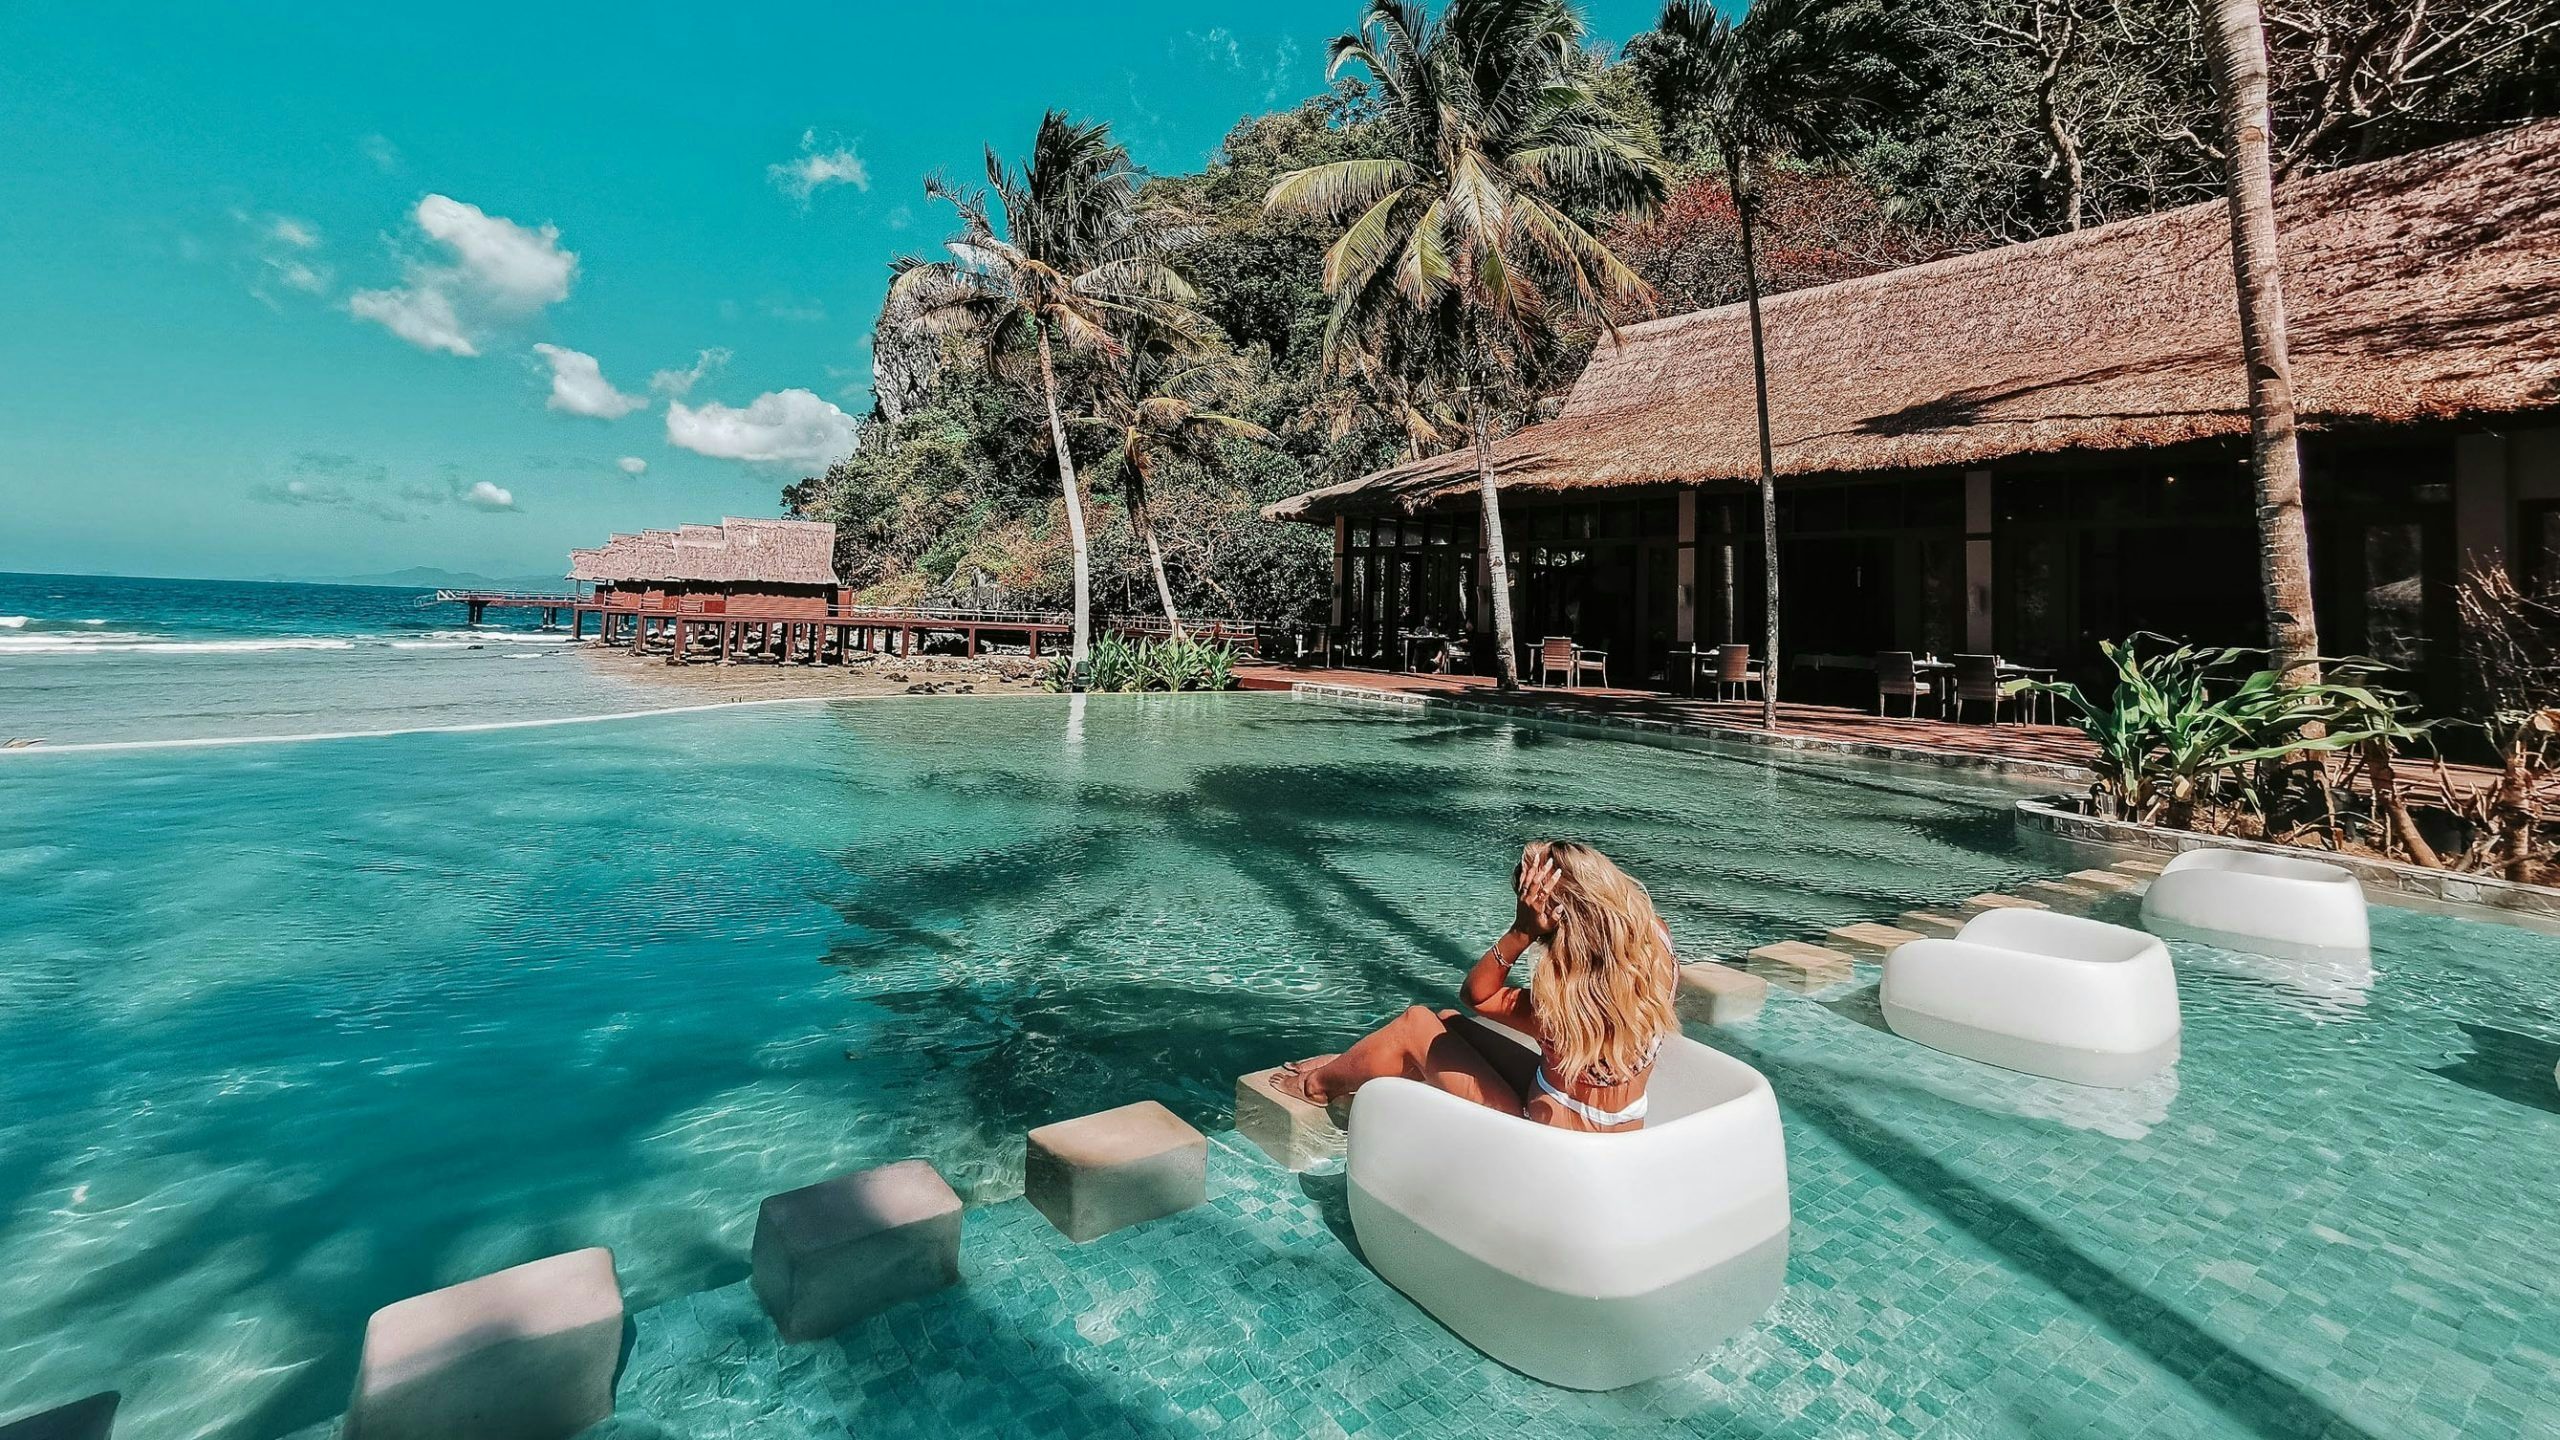 Redefining luxury hospitality: Why top brands need to shatter the 'paradise' promise